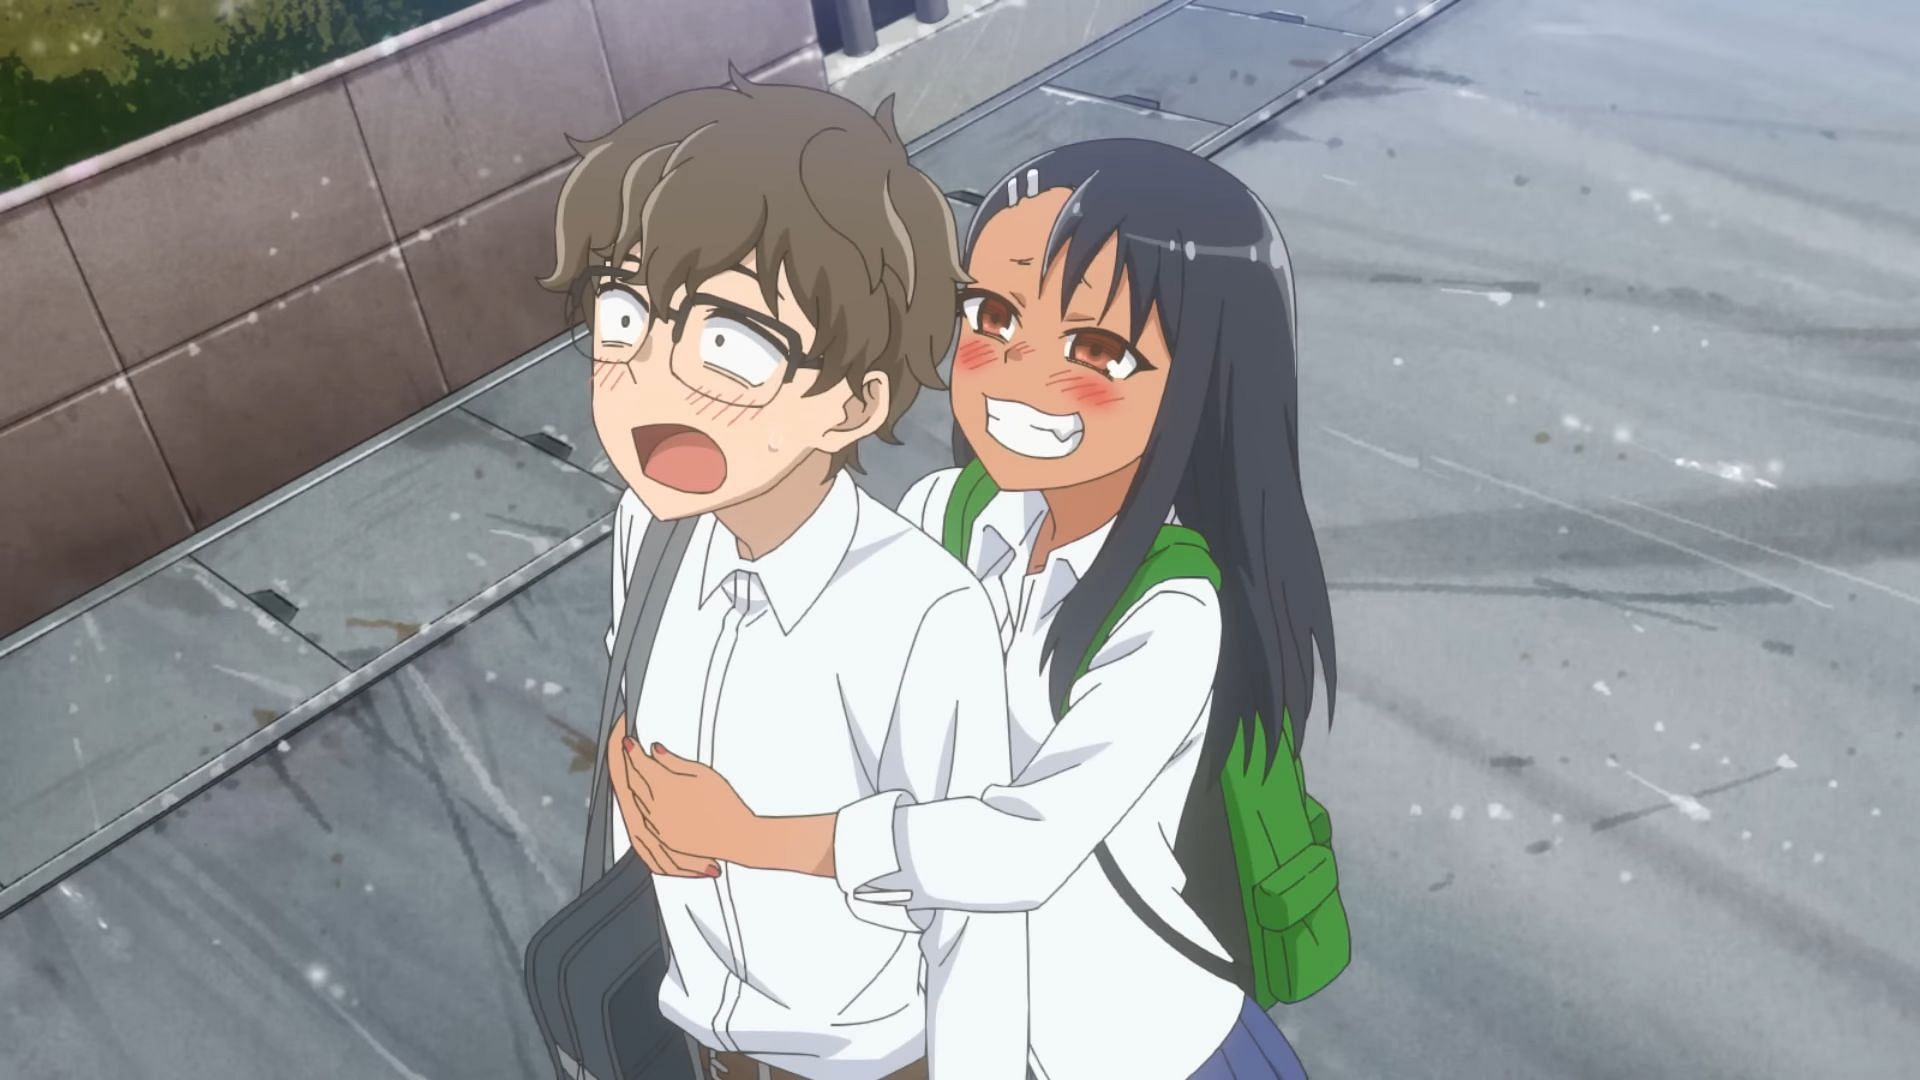 Don't Toy with Me, Miss Nagatoro Season 2 set to release in